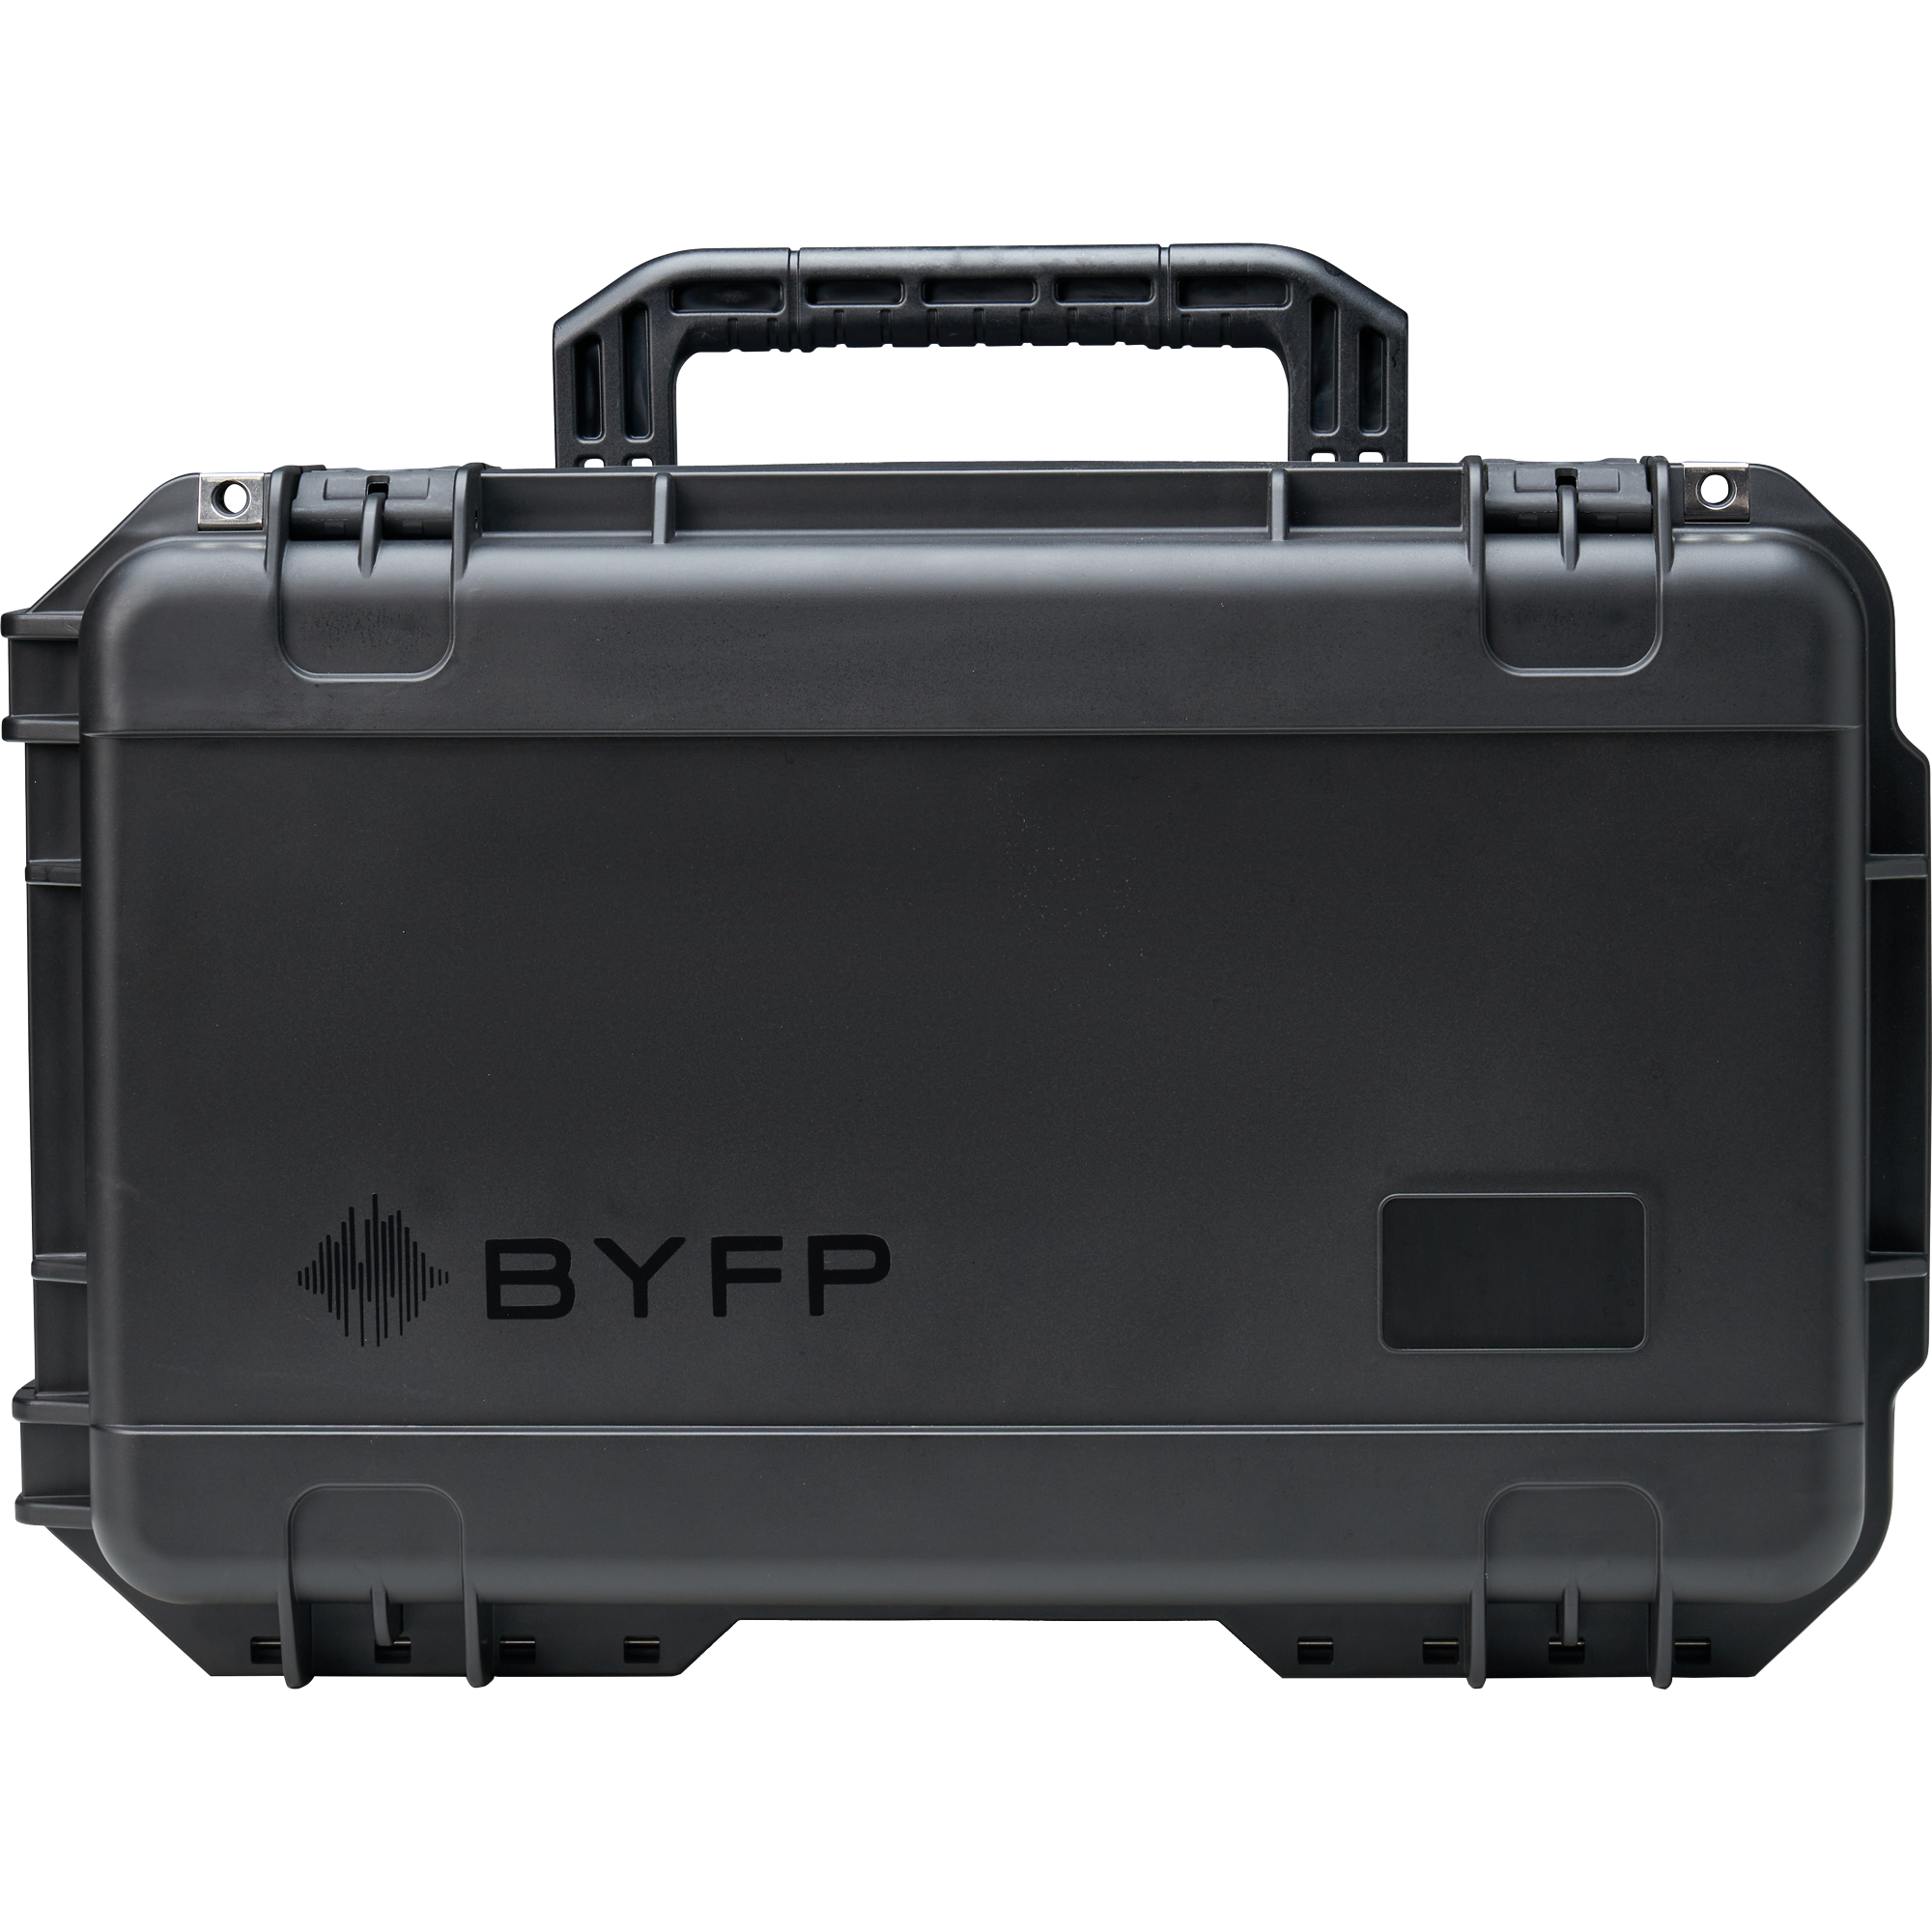 BYFP iSeries Case for 6x xVision Converters